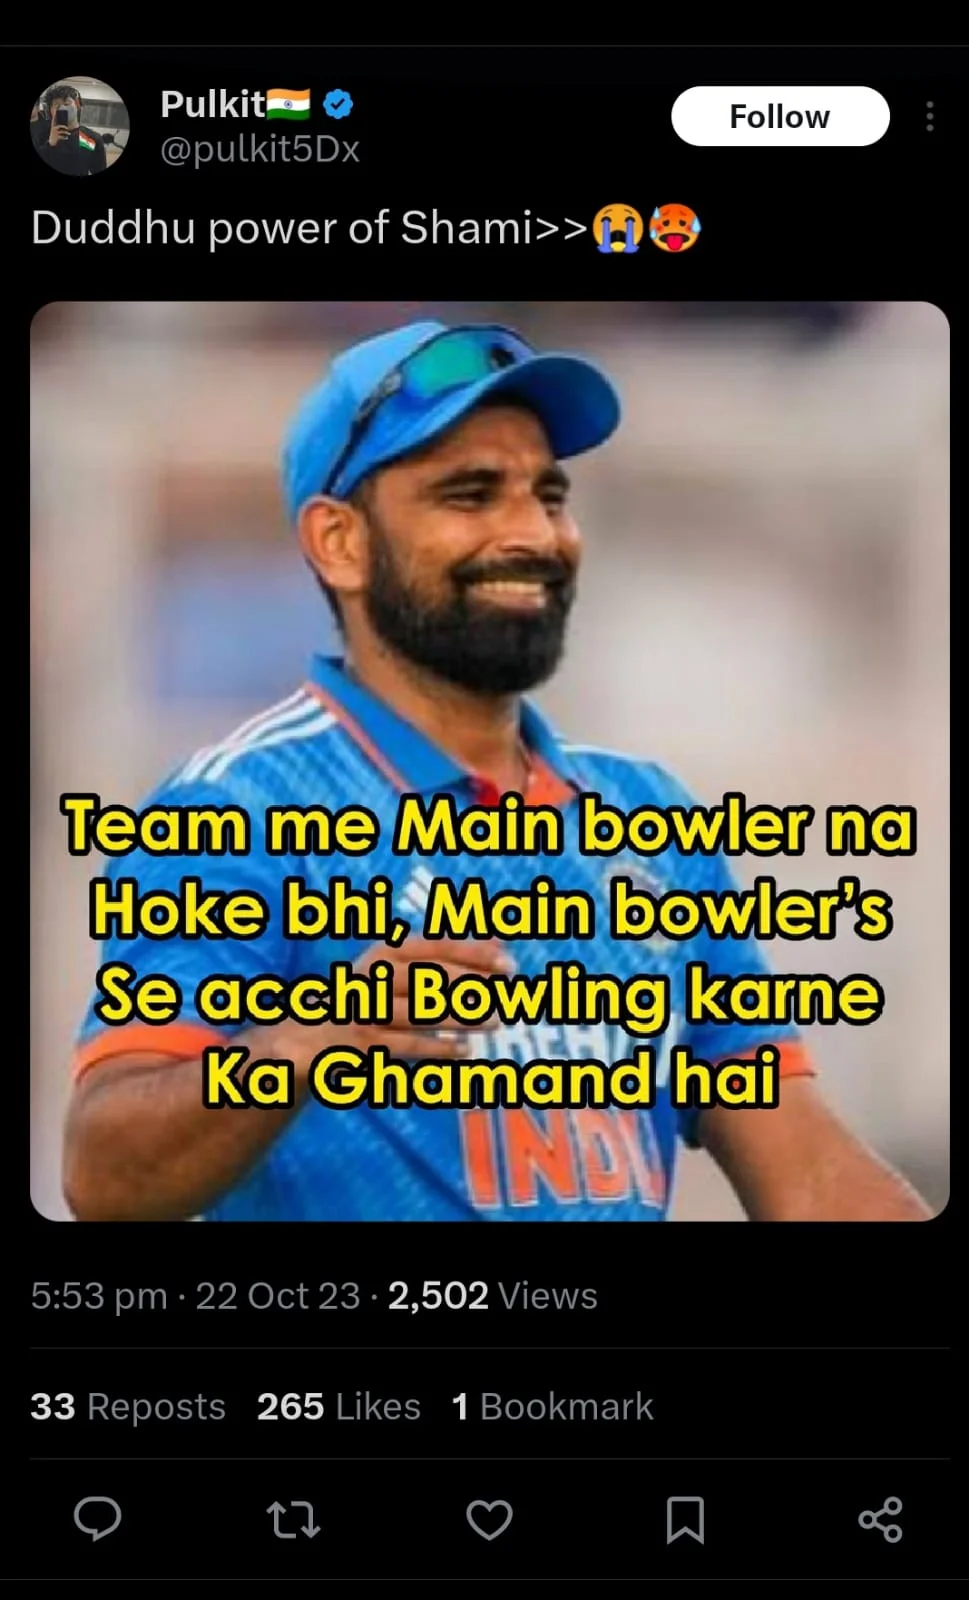 [IND vs NZ] Twitter Erupts With Funny Memes As Mohammed Shami Takes 5-Fer